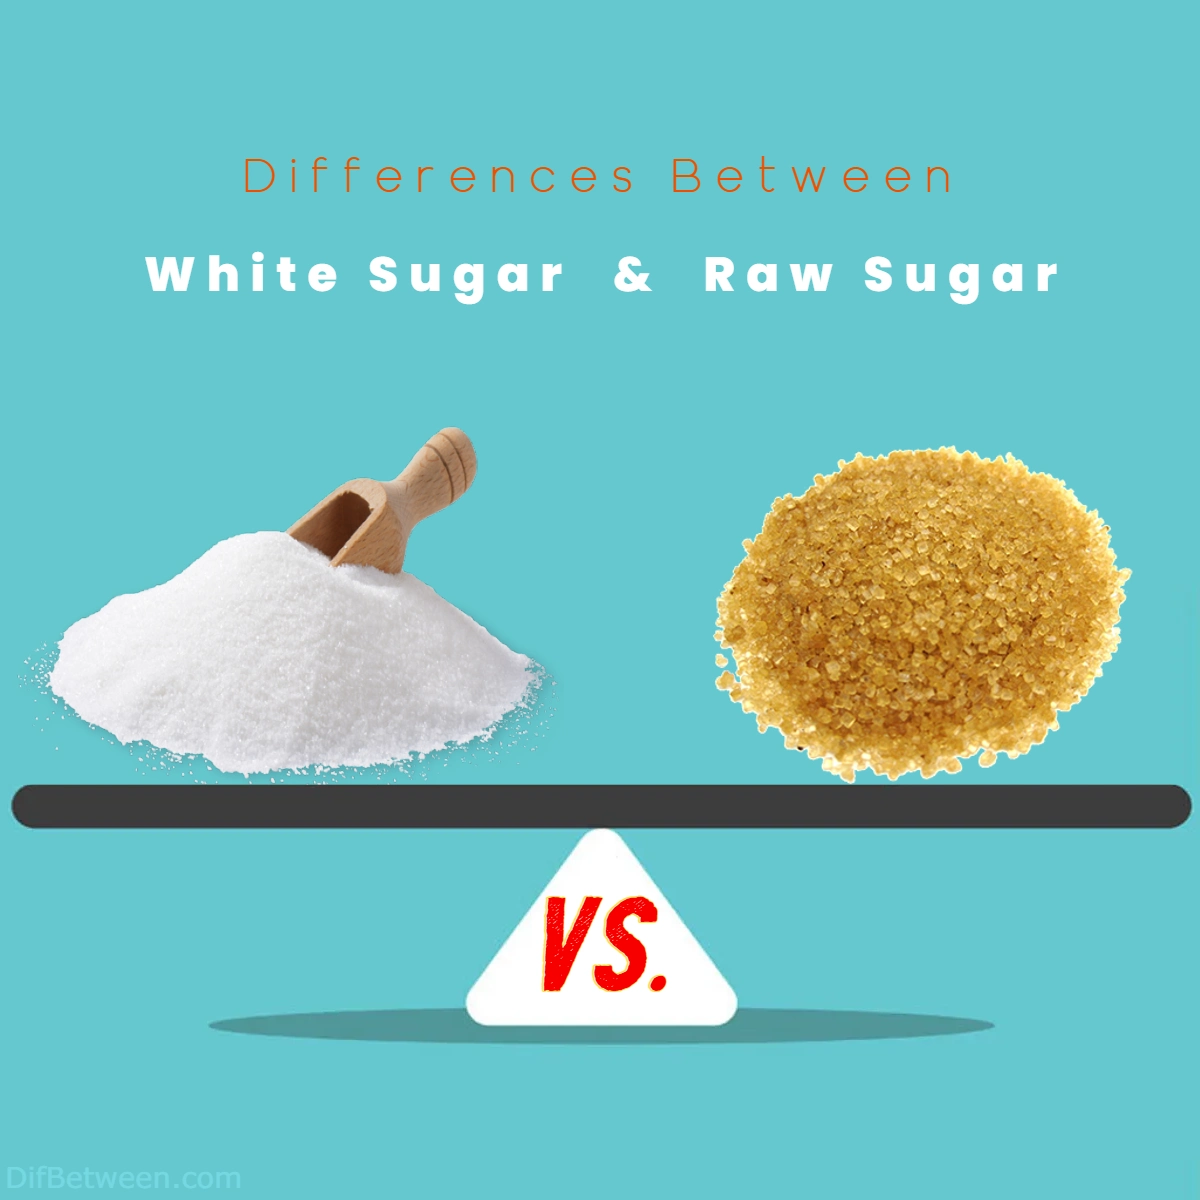 Difference Between White Sugar and Raw Sugar